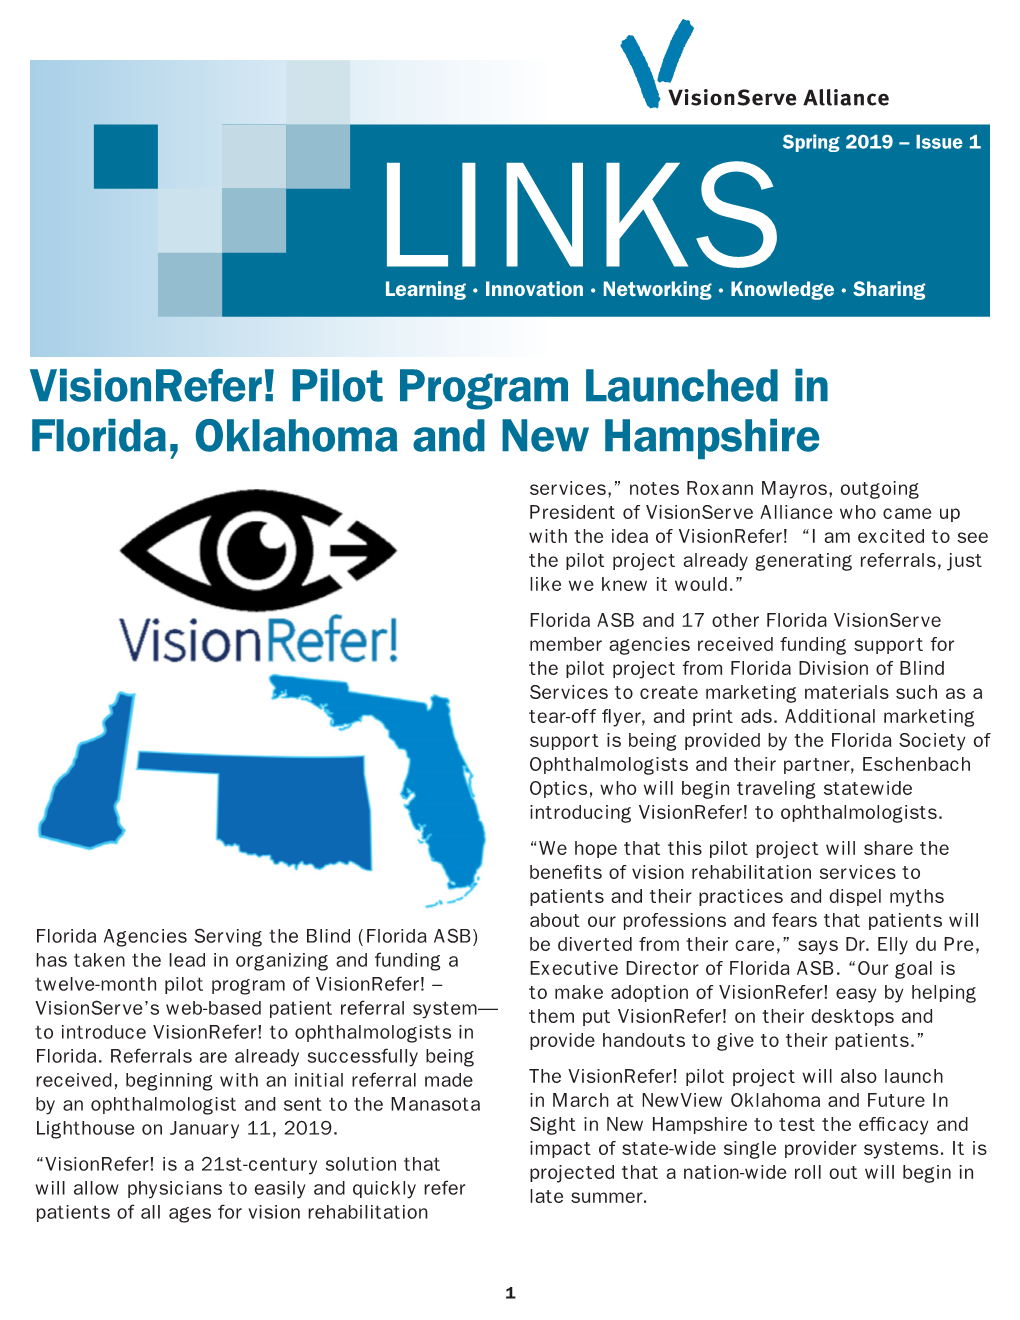 Pilot Program Launched in Florida, Oklahoma and New Hampshire